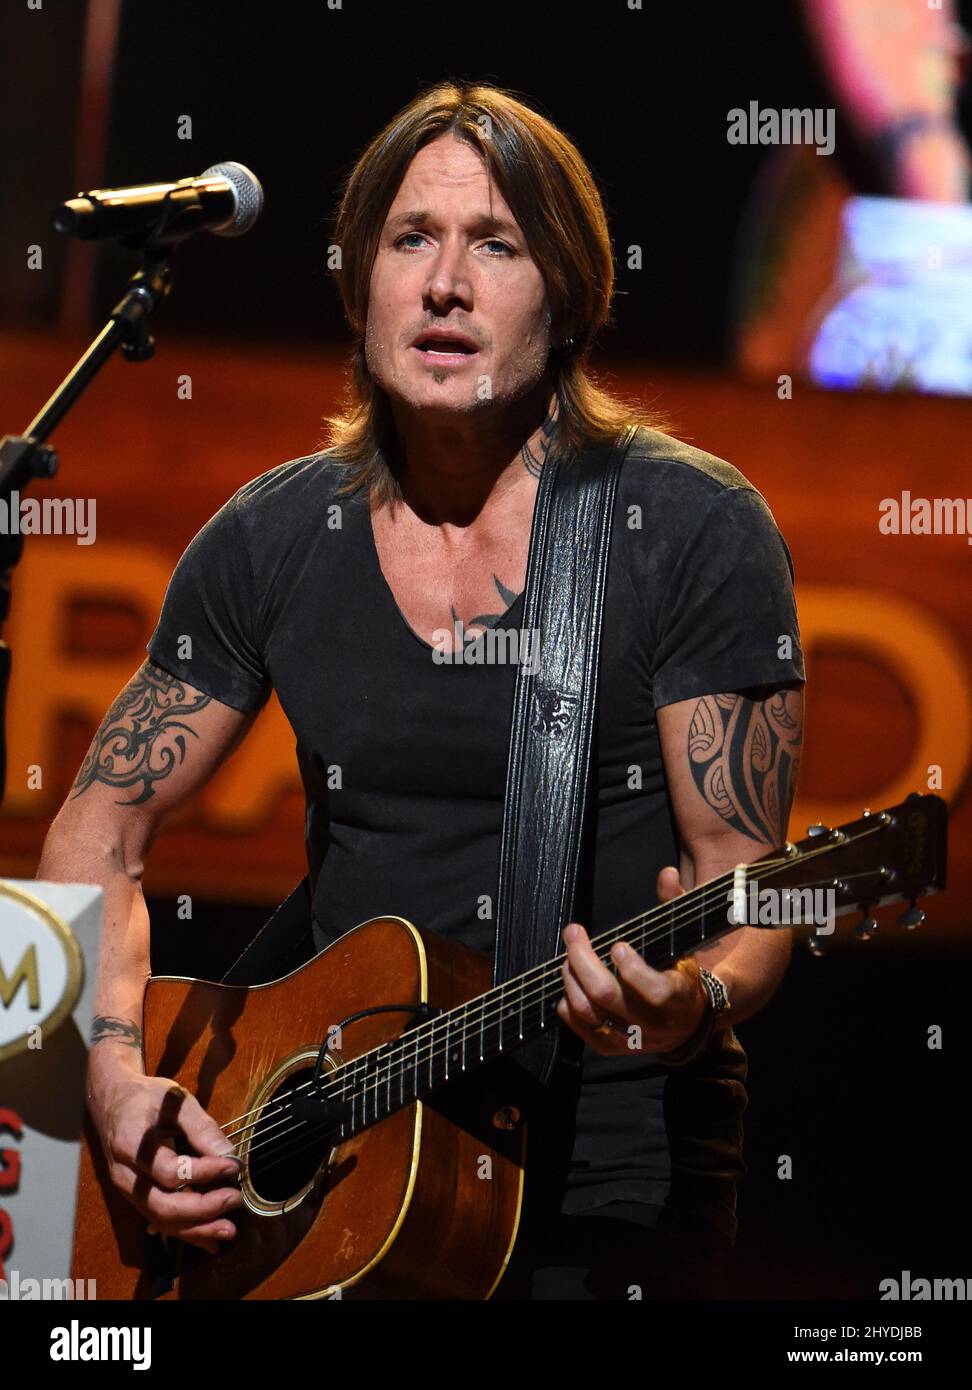 Keith Urban during Tuesday night performances at the Grand Ole Opry Stock Photo